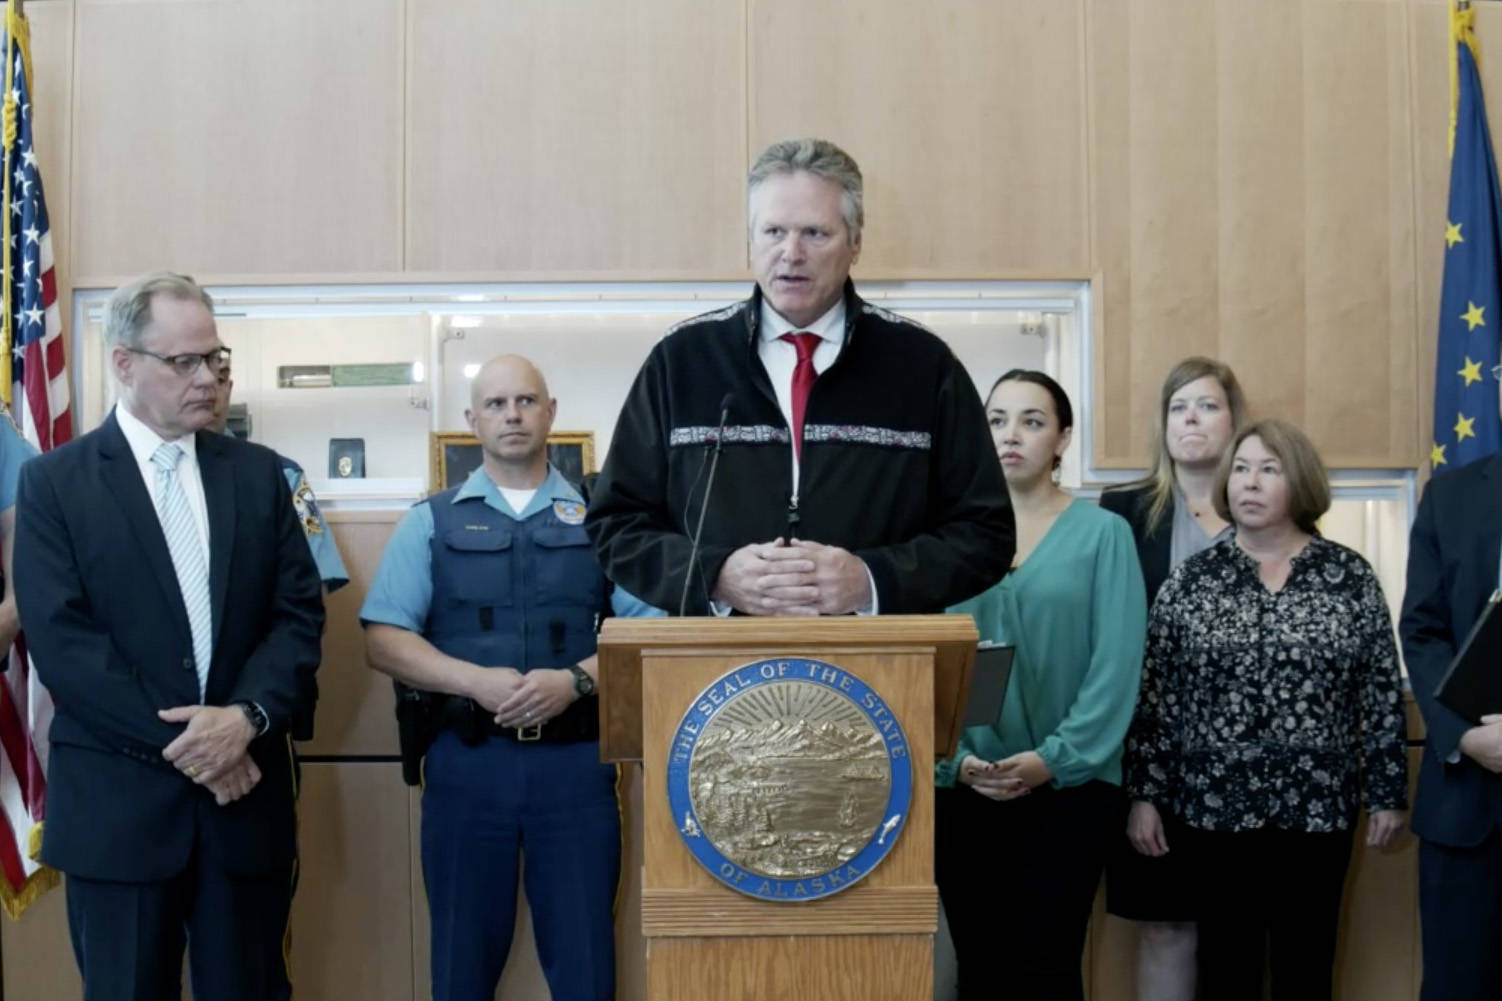 Gov. Mike Dunleavy outlines new measures the state will undertake to tackle sexual assault during a press conference streamed live from the Alaska Department of Public Safety Crime Lab in Anchorage on Tuesday, Aug. 10, 2021. (Screenshot)